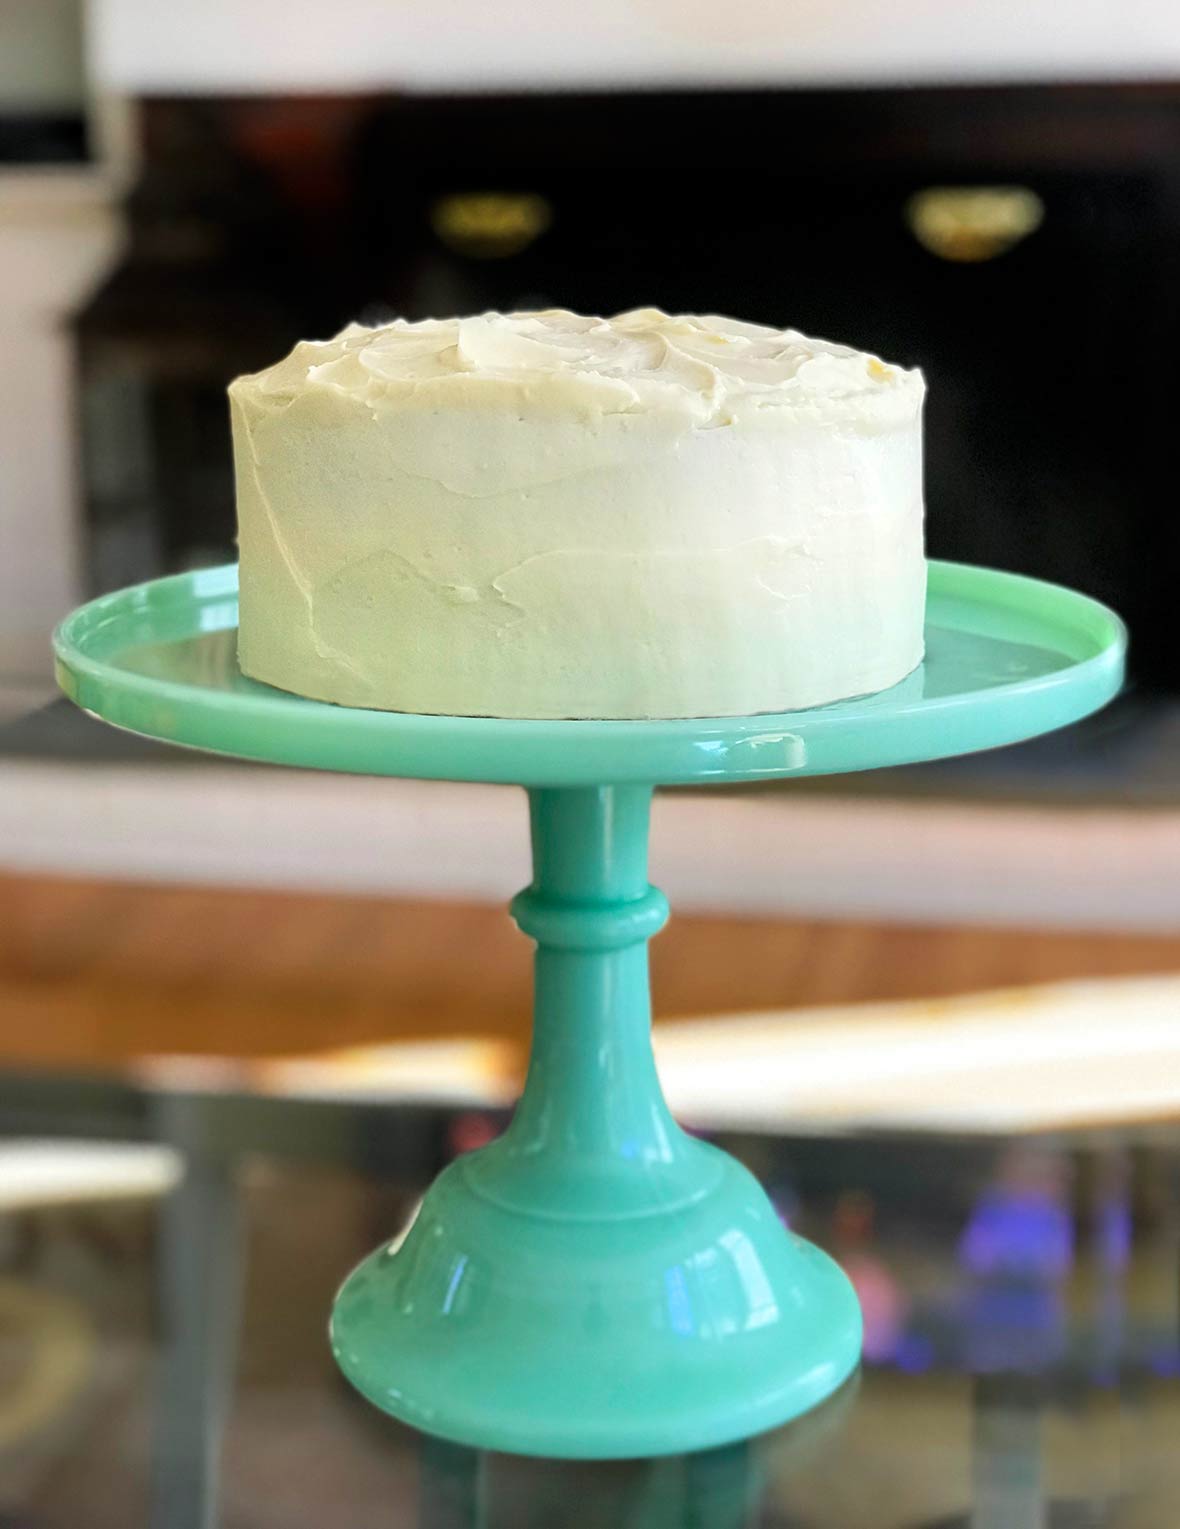 A pumpkin cake with maple-cream cheese frosting on a teal cake stand.